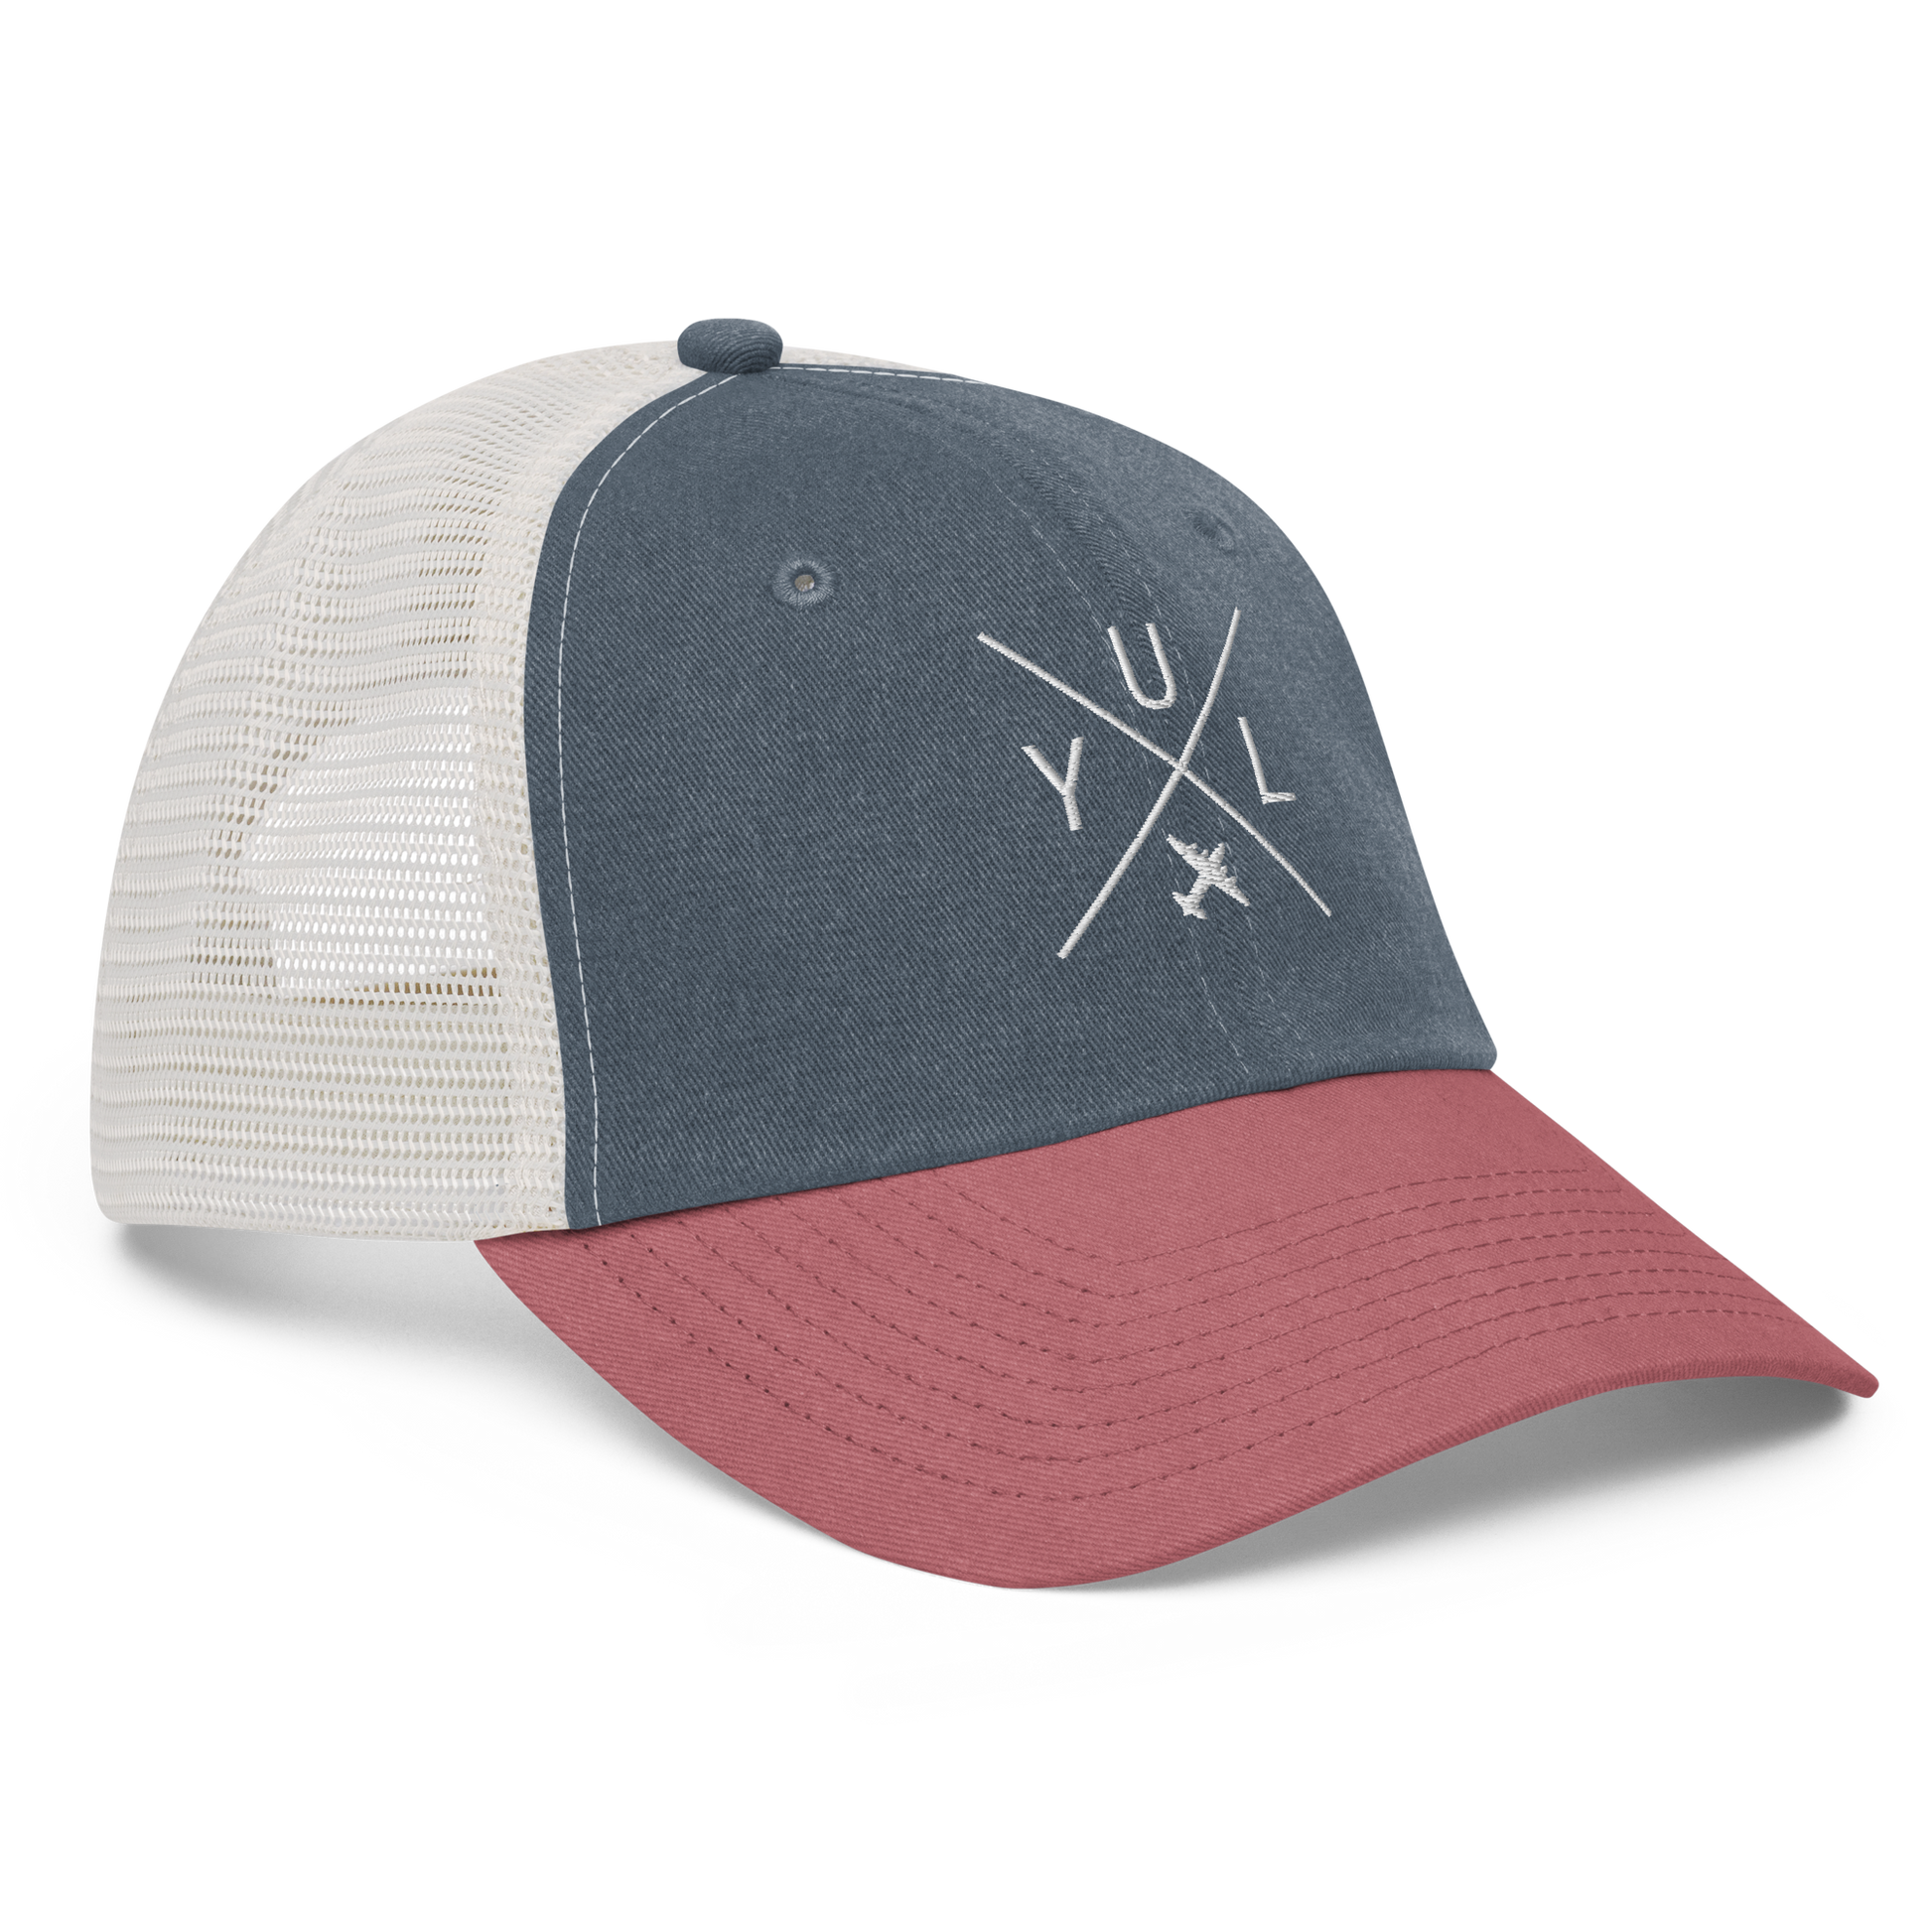 YHM Designs - YUL Montreal Pigment-Dyed Trucker Cap - Crossed-X Design with Airport Code and Vintage Propliner - White Embroidery - Image 13